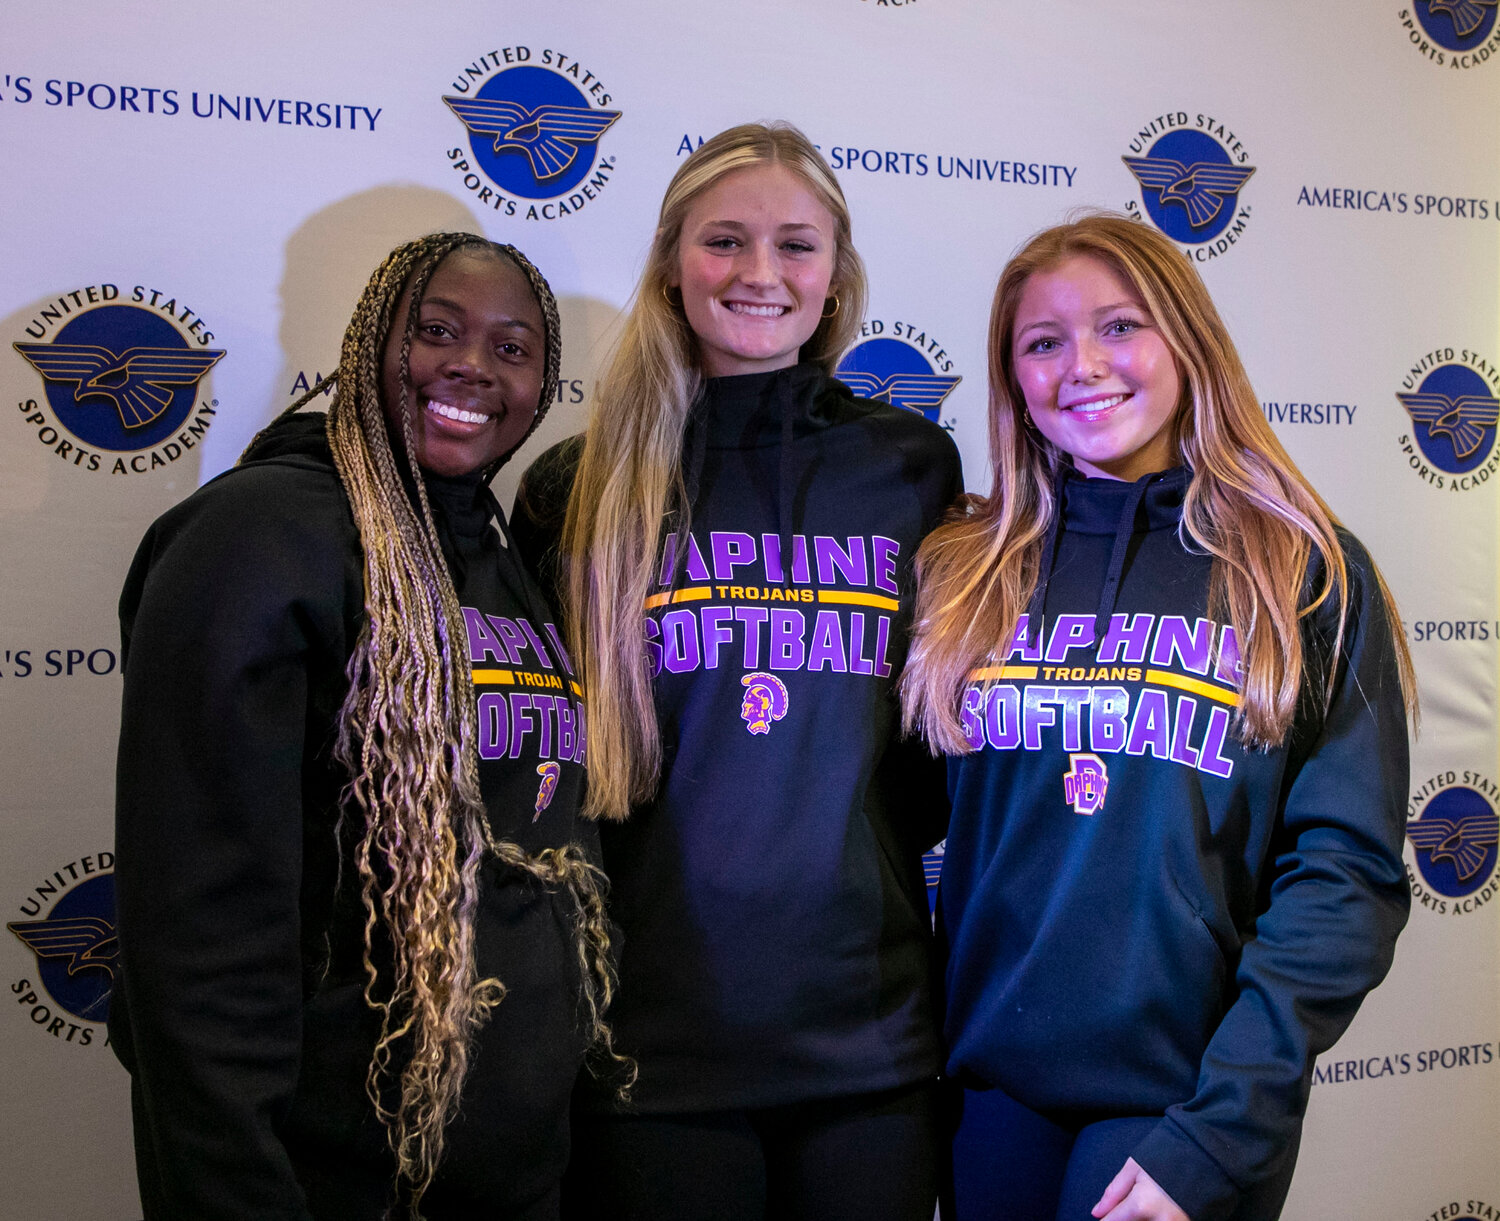 Vic Moten, Hannah Newport and Farley Harris met with the media on behalf of the Daphne Trojans Tuesday afternoon at the United States Sports Academy’s Baldwin County Media Day.